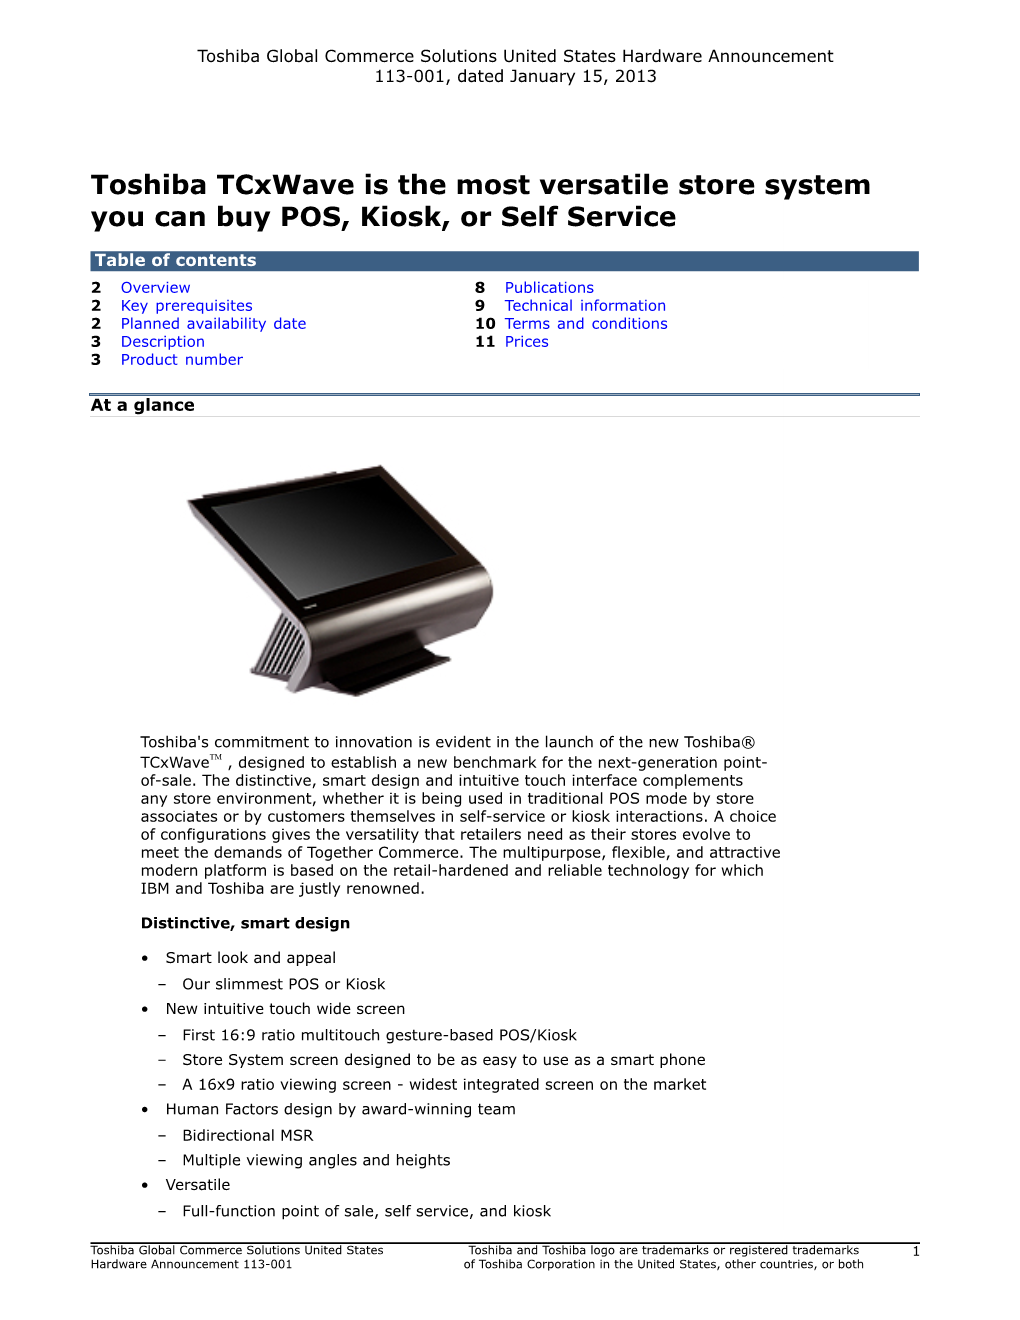 Toshiba Tcxwave Is the Most Versatile Store System You Can Buy POS, Kiosk, Or Self Service